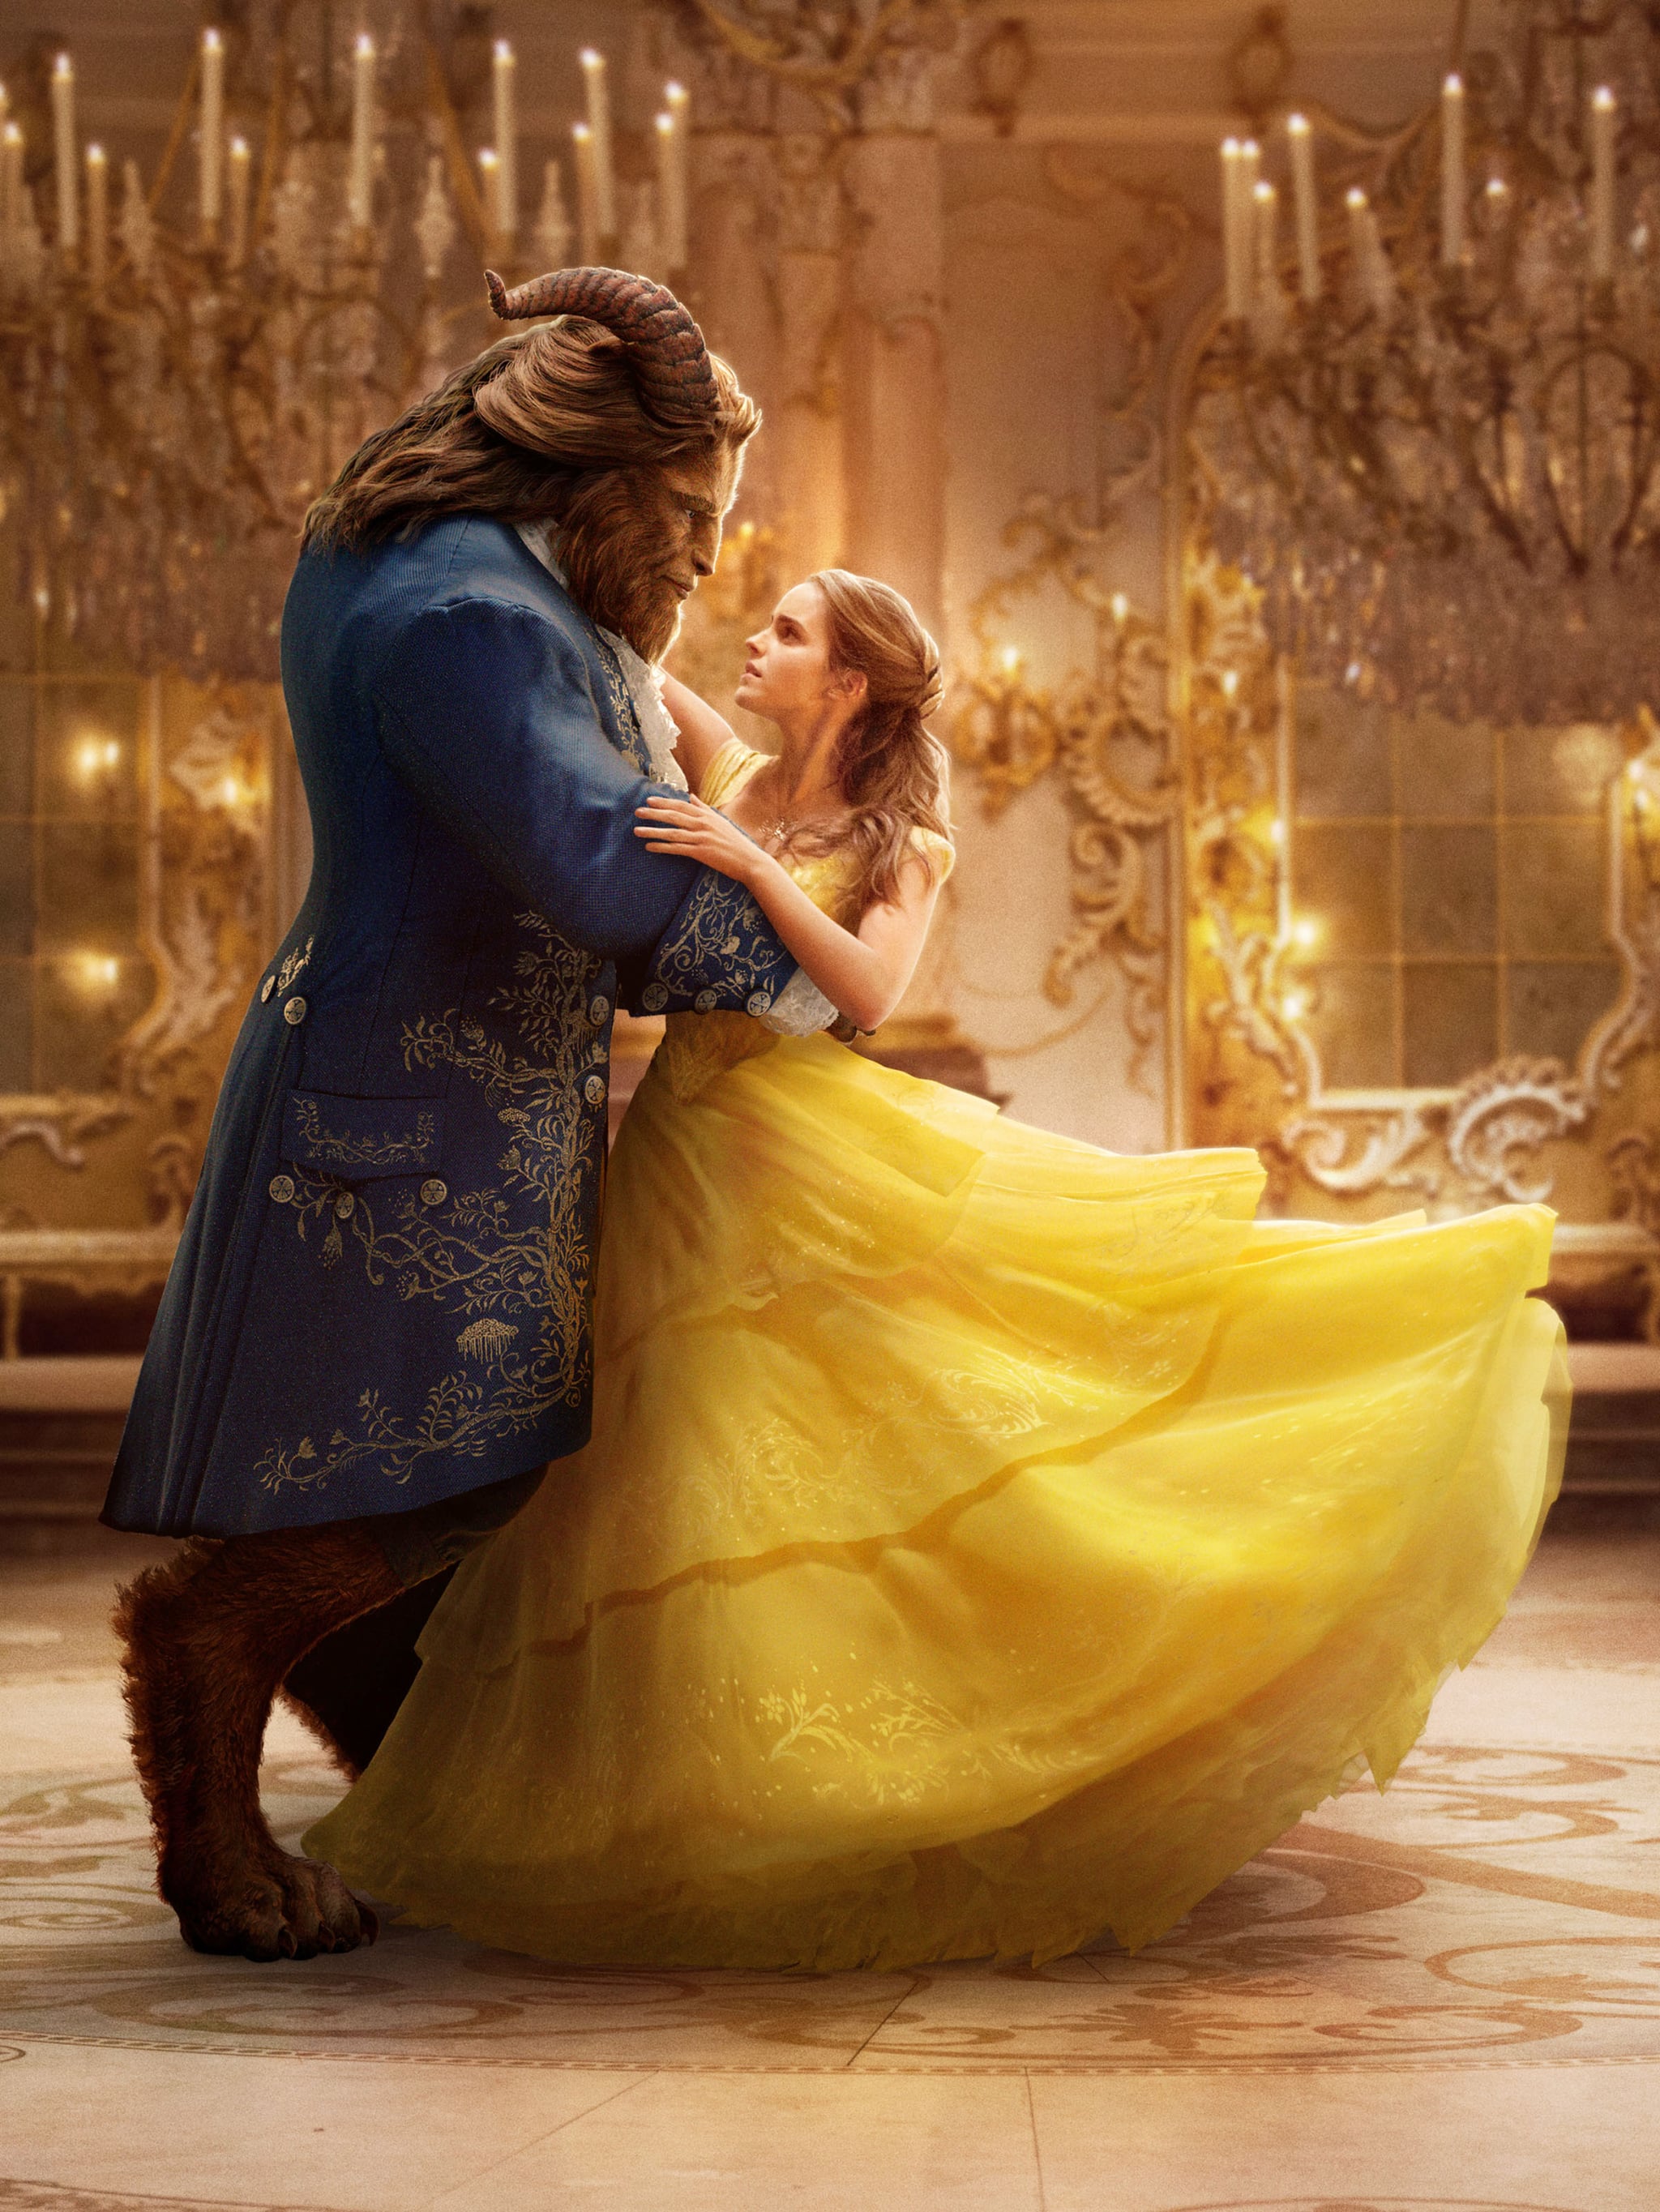 Beauty and the Beast Movies | POPSUGAR Entertainment